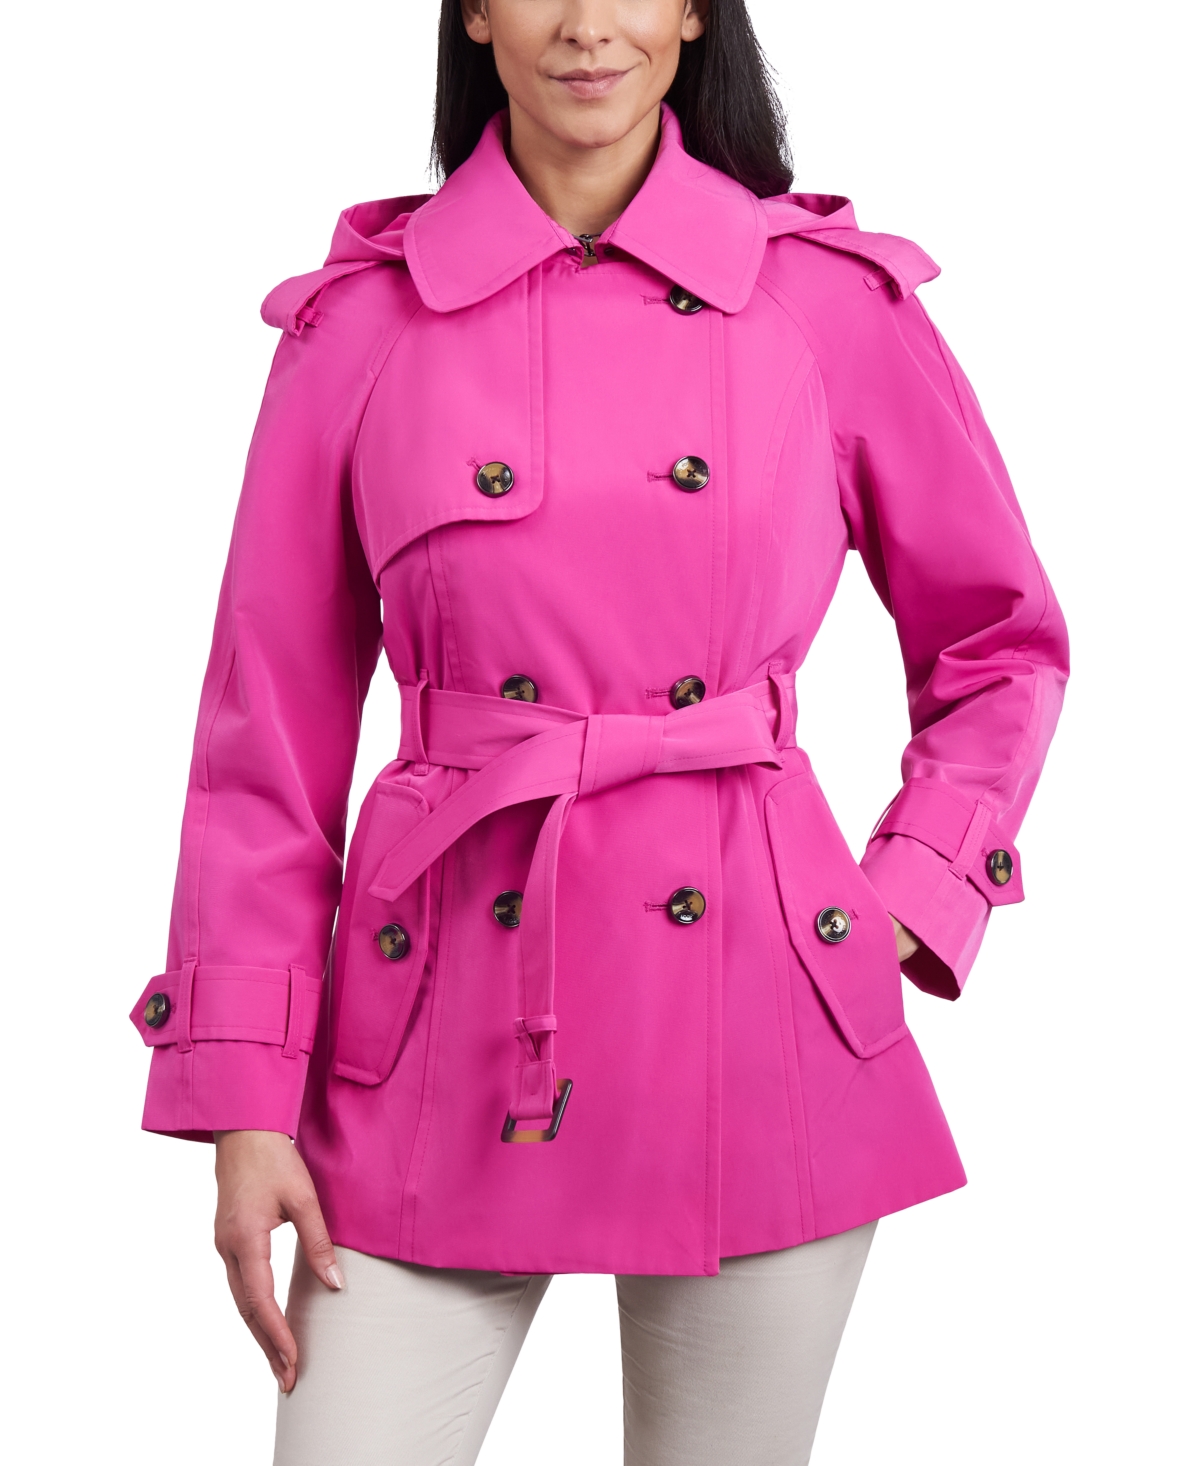 Women's Double-Breasted Belted Trench Coat - Coral